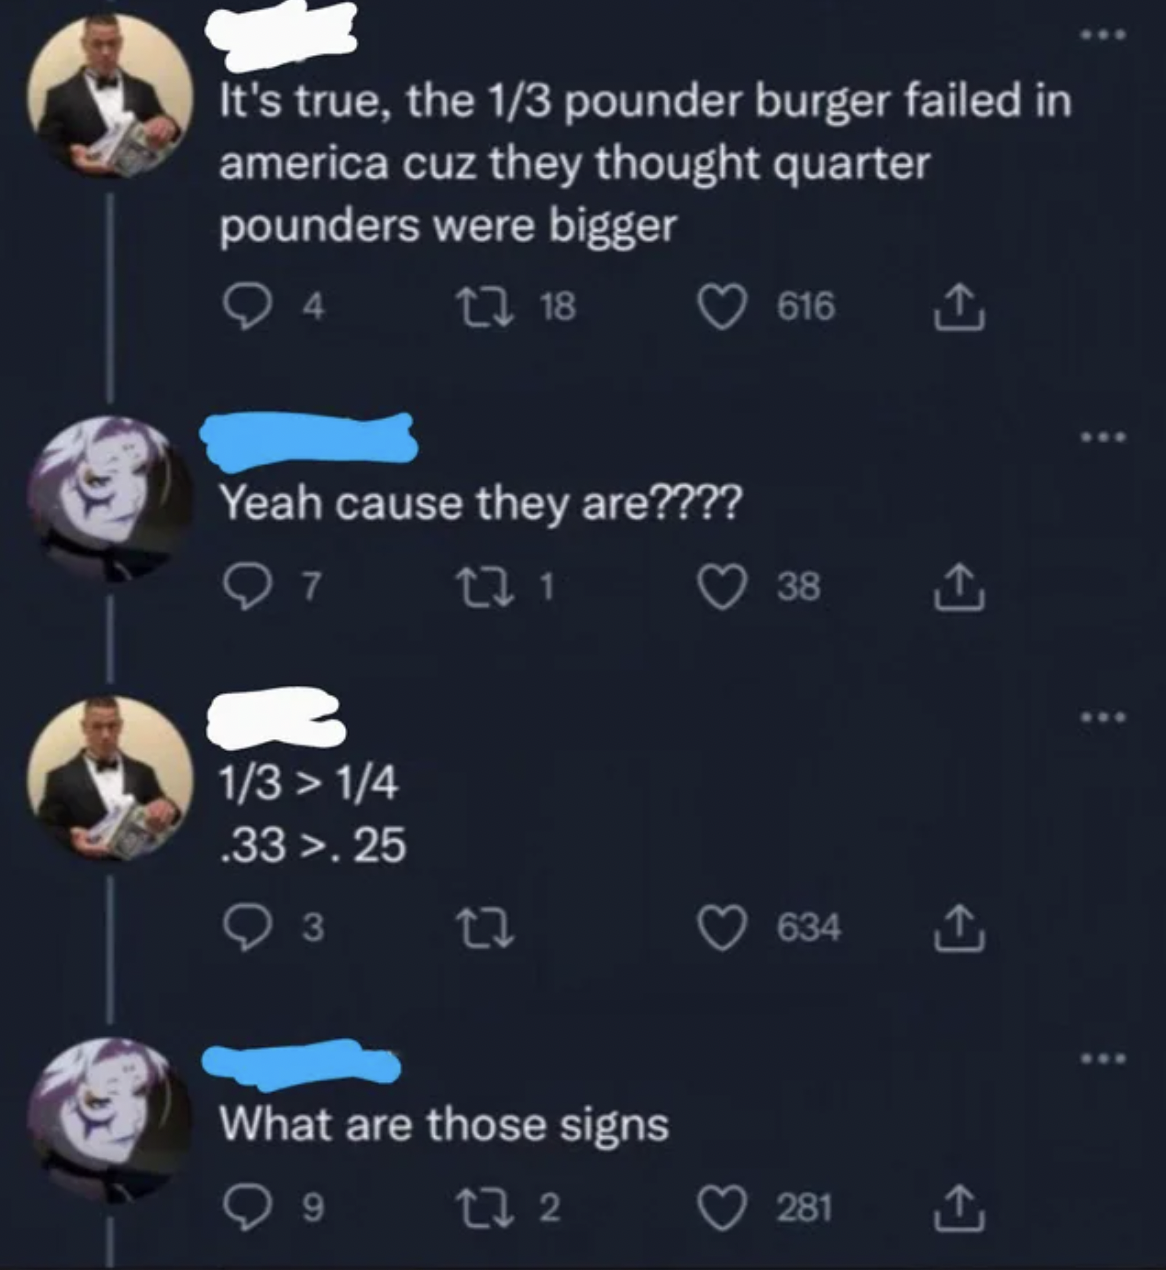 Facepalms - 1 3 pounder failed in america - It's true, the 13 pounder burger failed in america cuz they thought quarter pounders were bigger 4 118 Yeah cause they are???? 7 22 1 13 > 14 .33 >.25 3 12 What are those signs 9 12 2 616 38 634 281 L